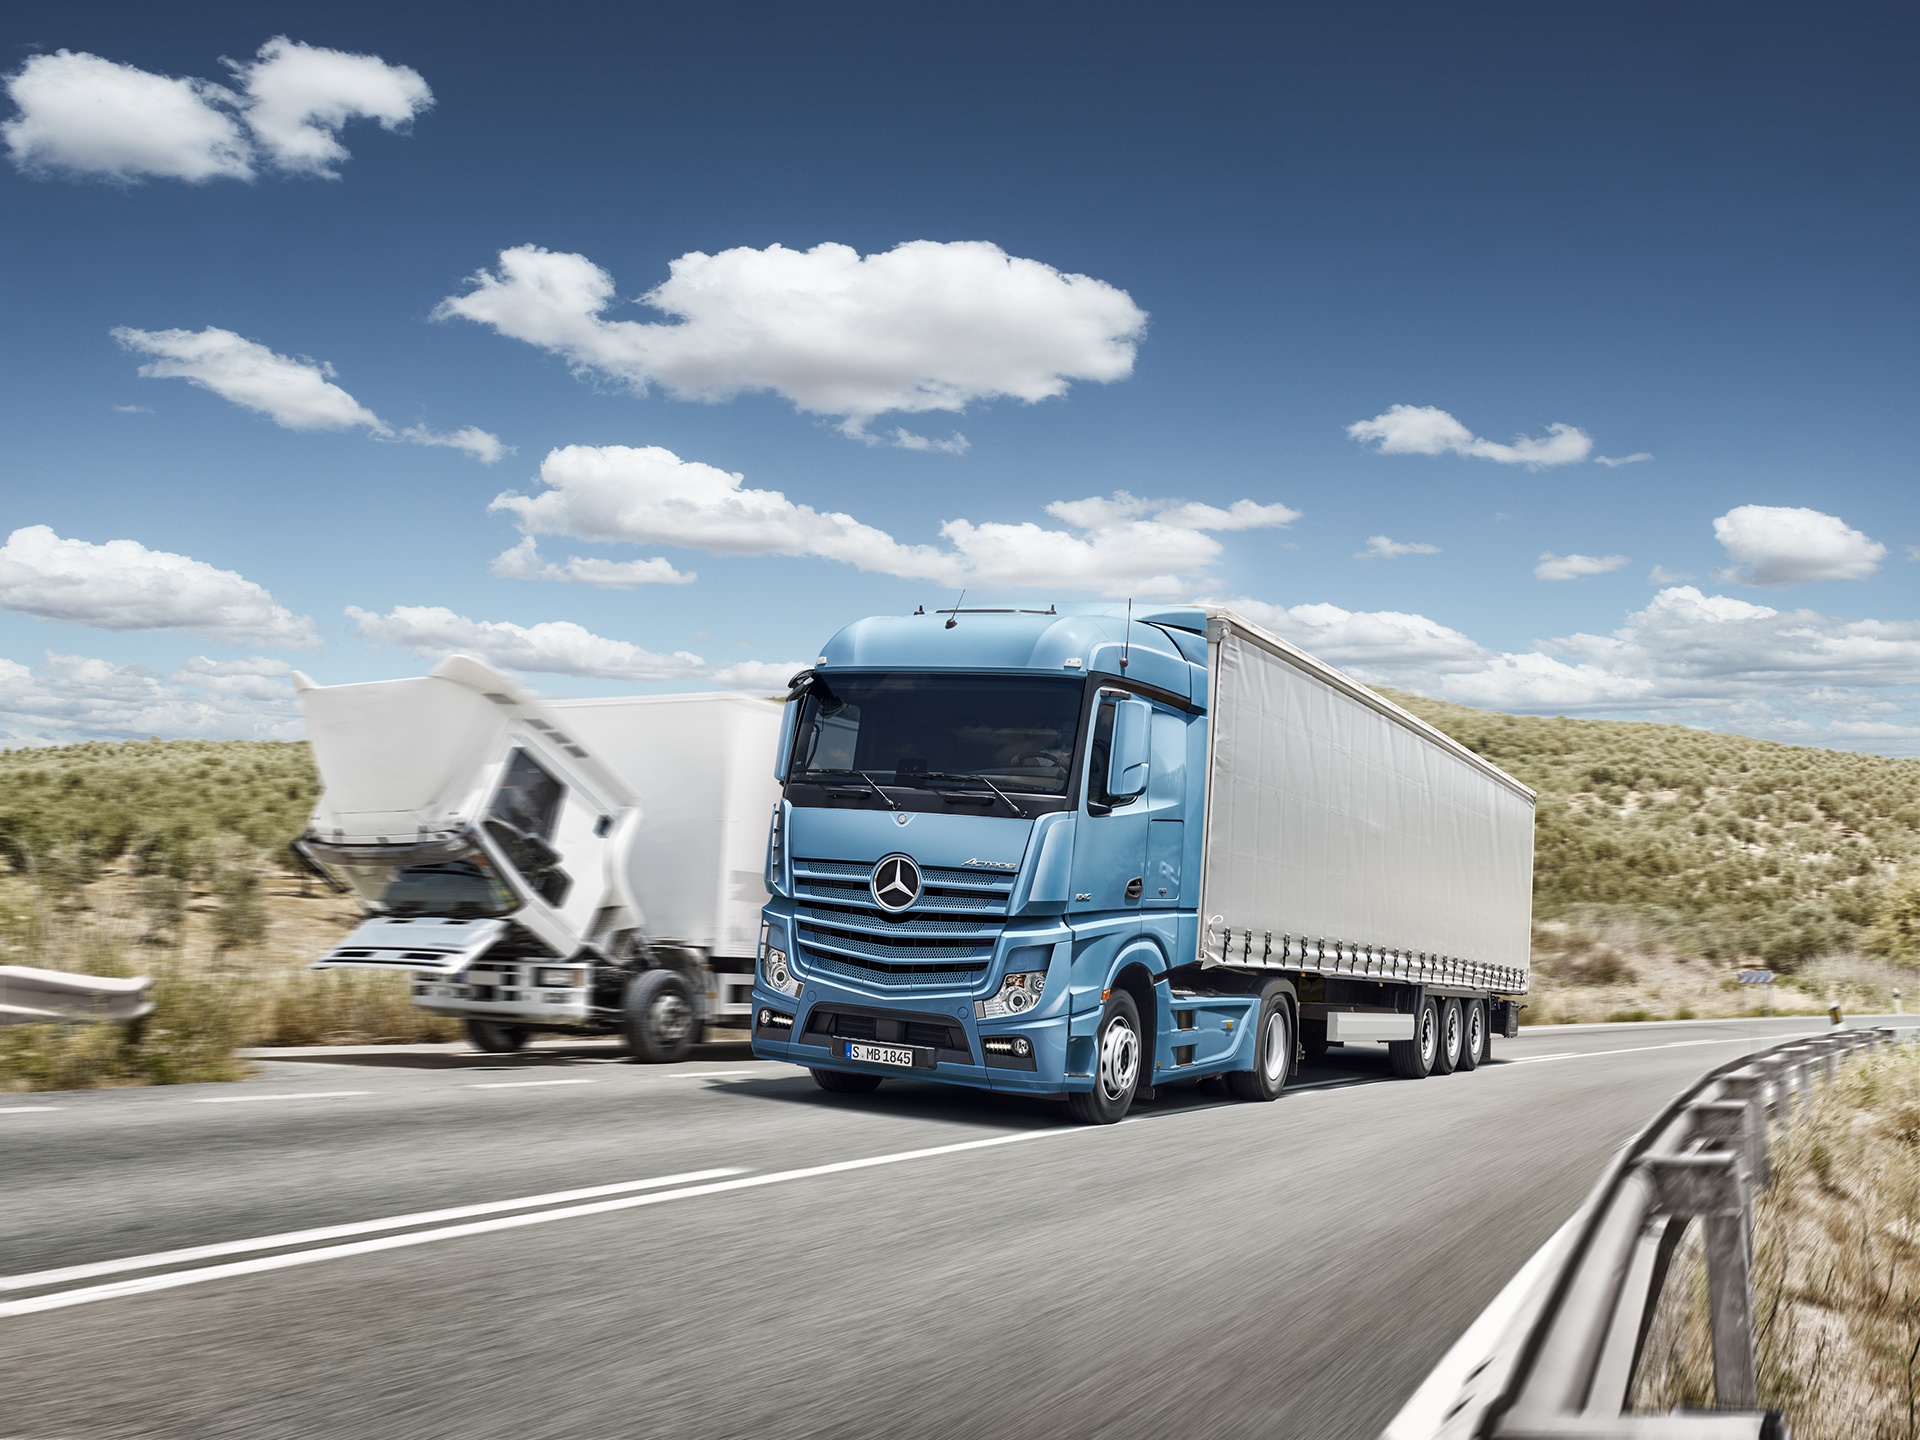 Download Mercedes Actros wallpapers Free for Android - Mercedes Actros  wallpapers APK Download - STEPrimo.com